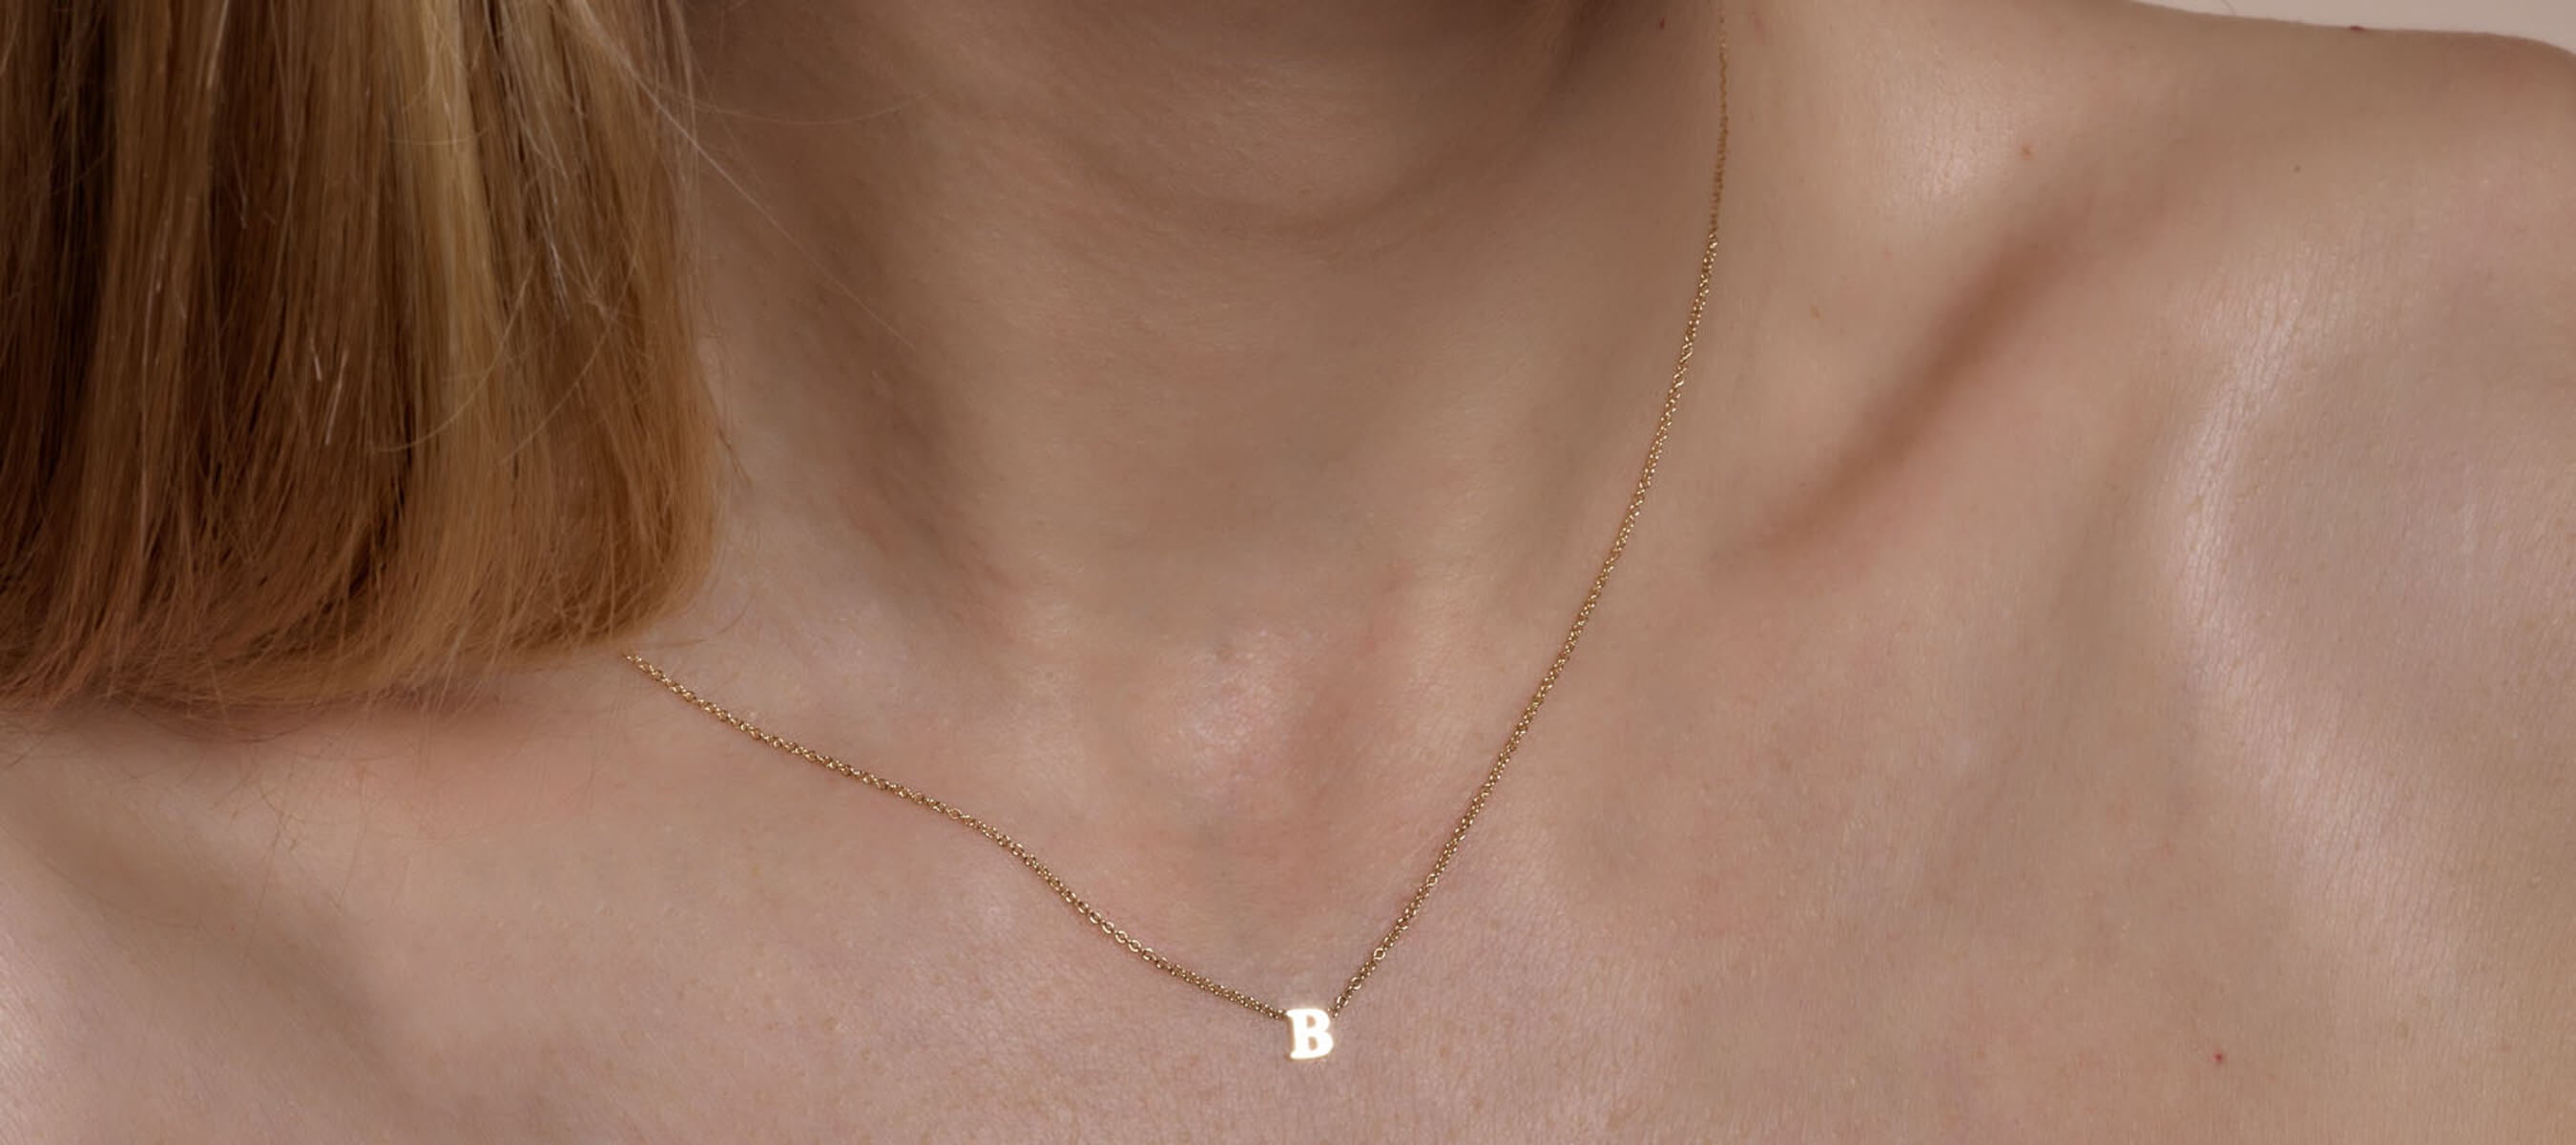 Female model with wearing letter B gold initial necklace.